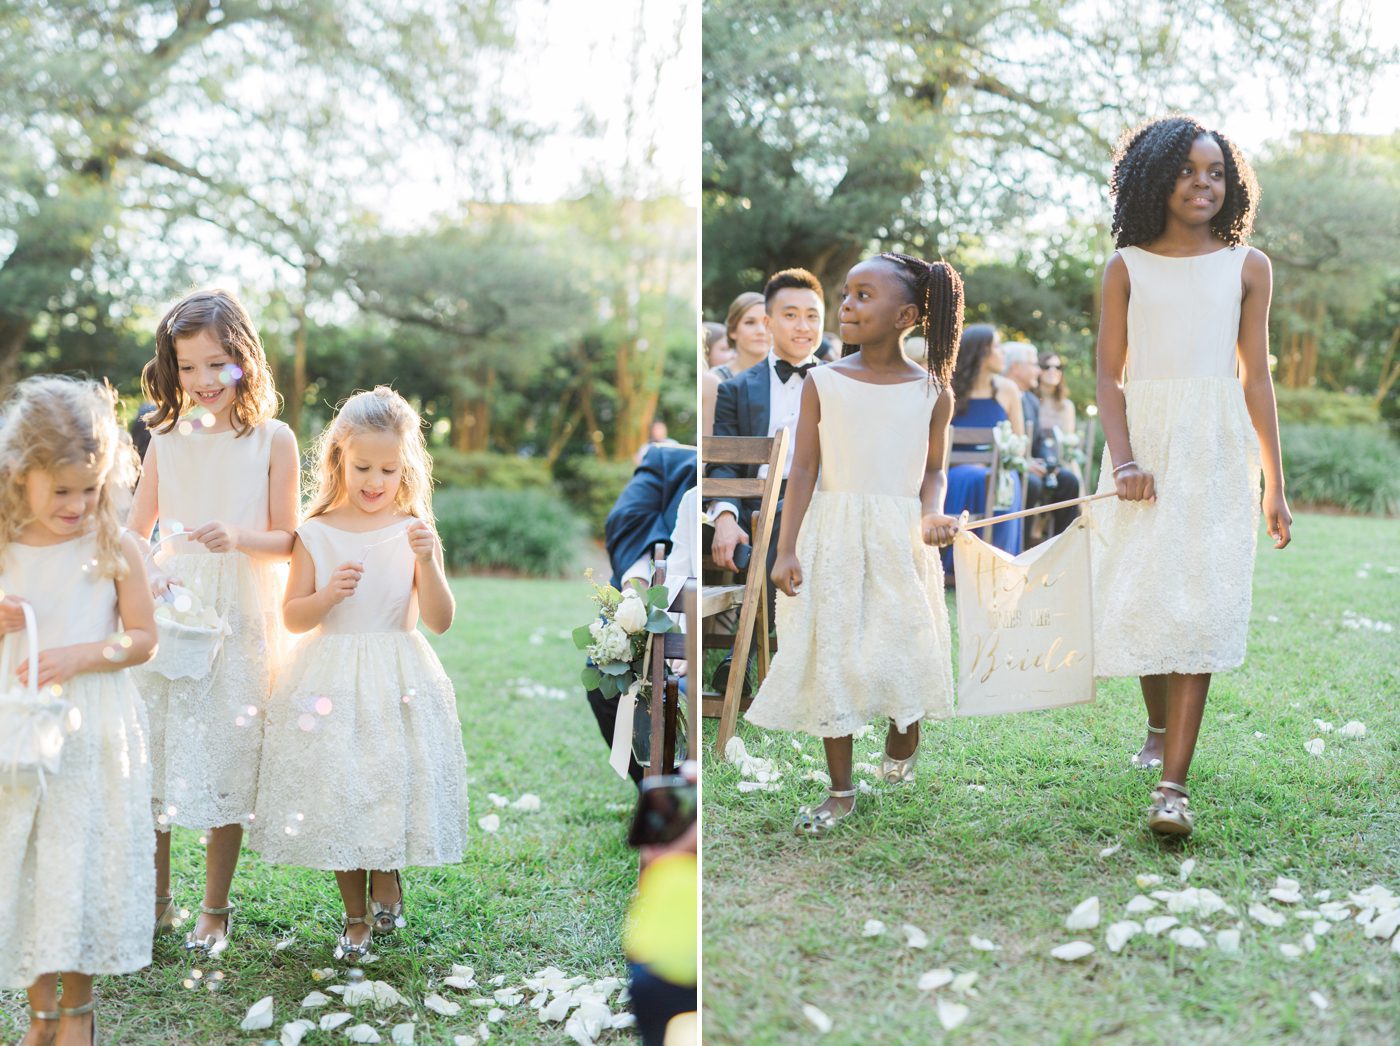 Flower girls with bubbles and Here Comes the Bride sign | Elegant William Aiken House Wedding Photos | Charleston SC wedding photographers Catherine Ann Photography